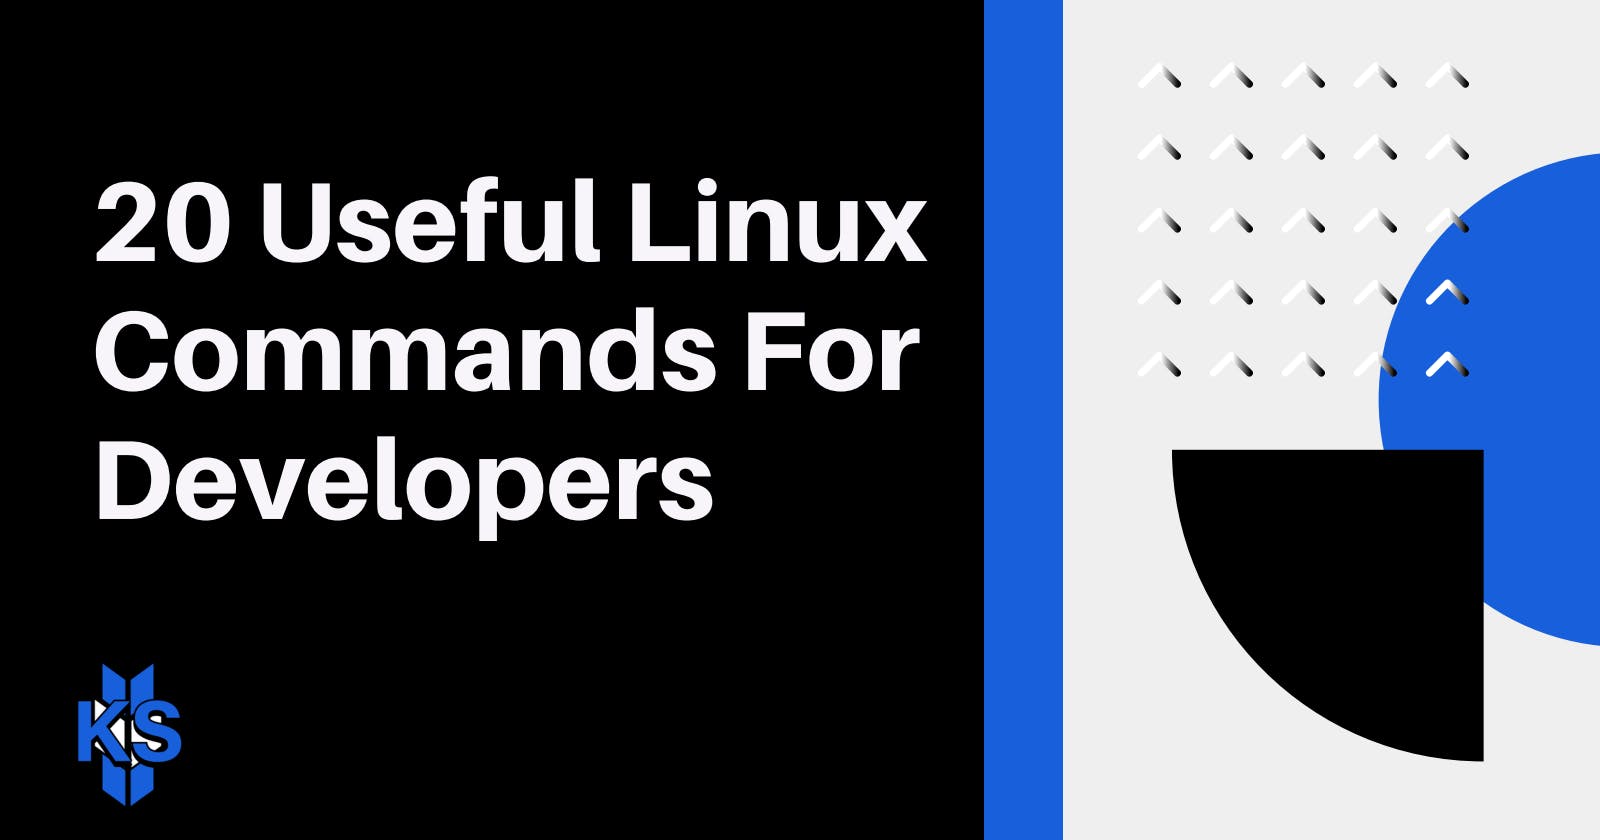 20 Useful Linux Commands For Developers